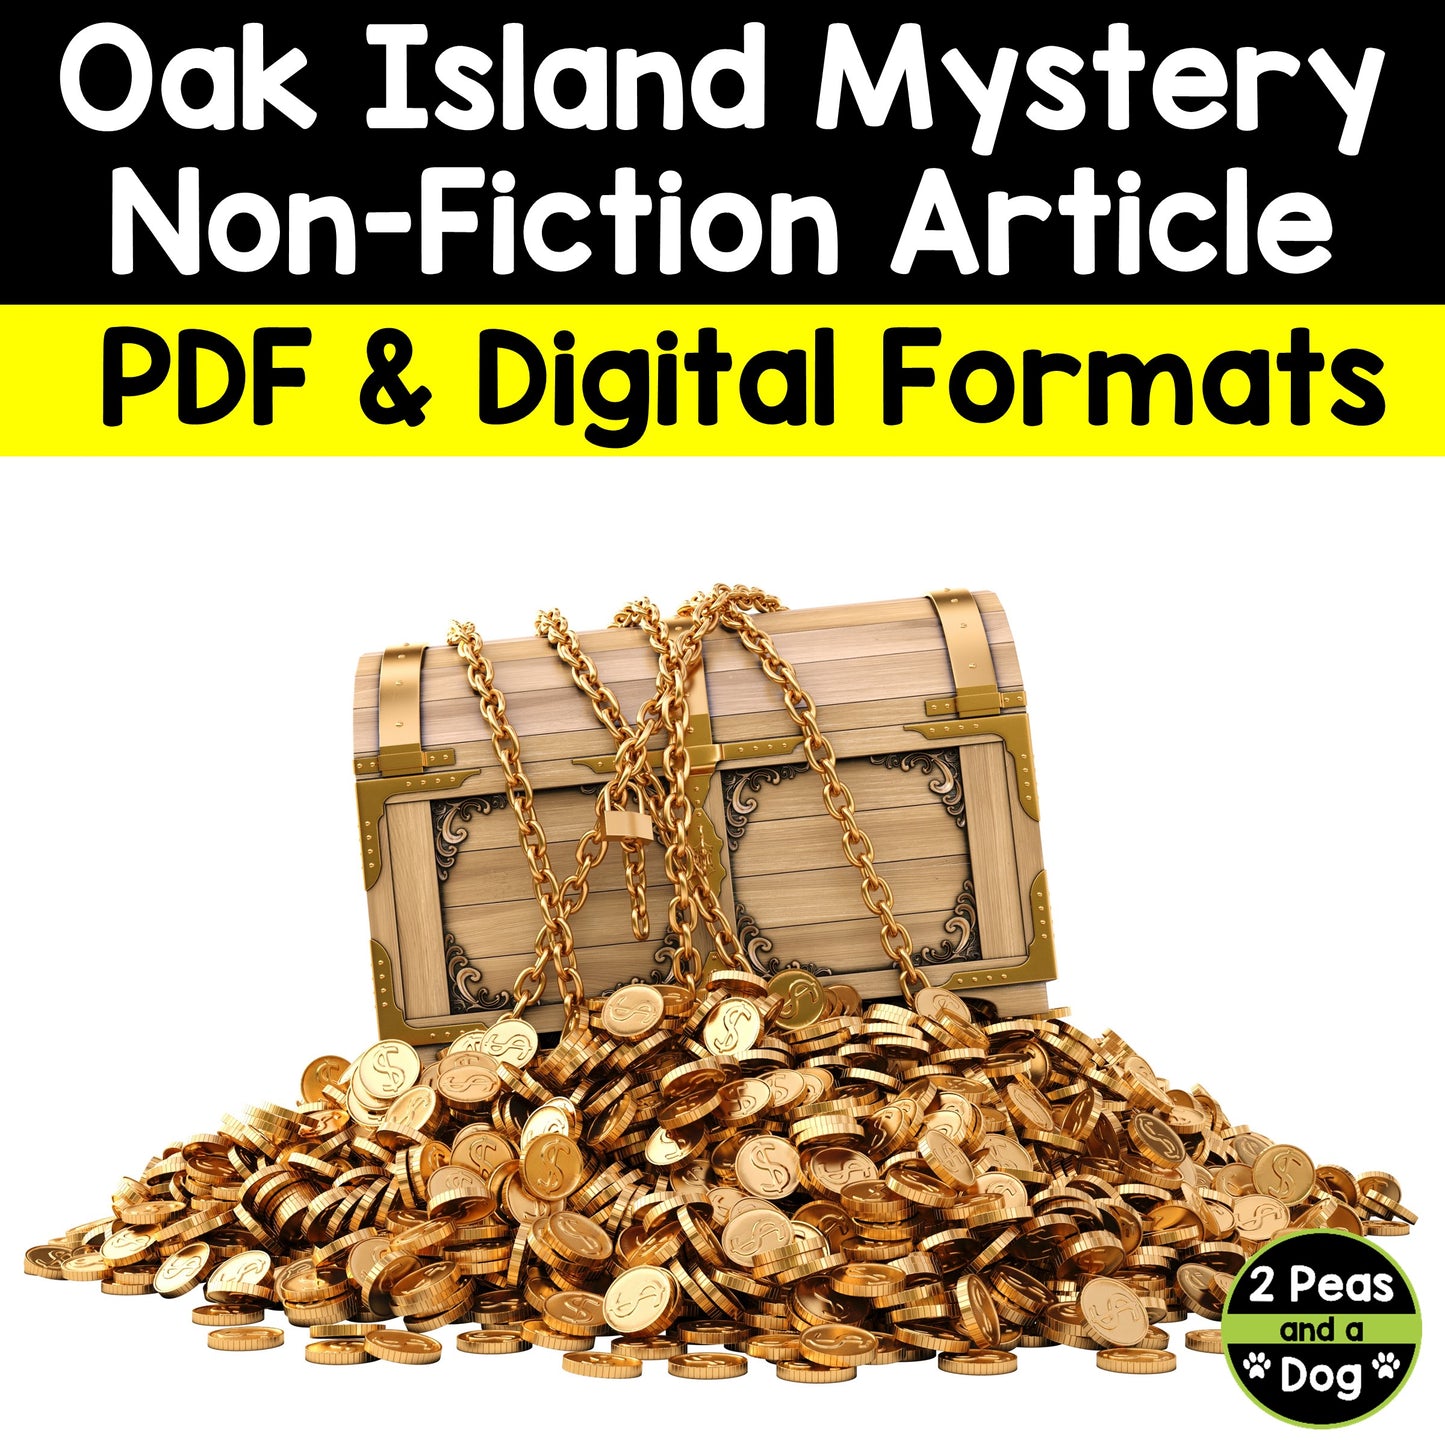 The Mystery of Oak Island Non-Fiction Article